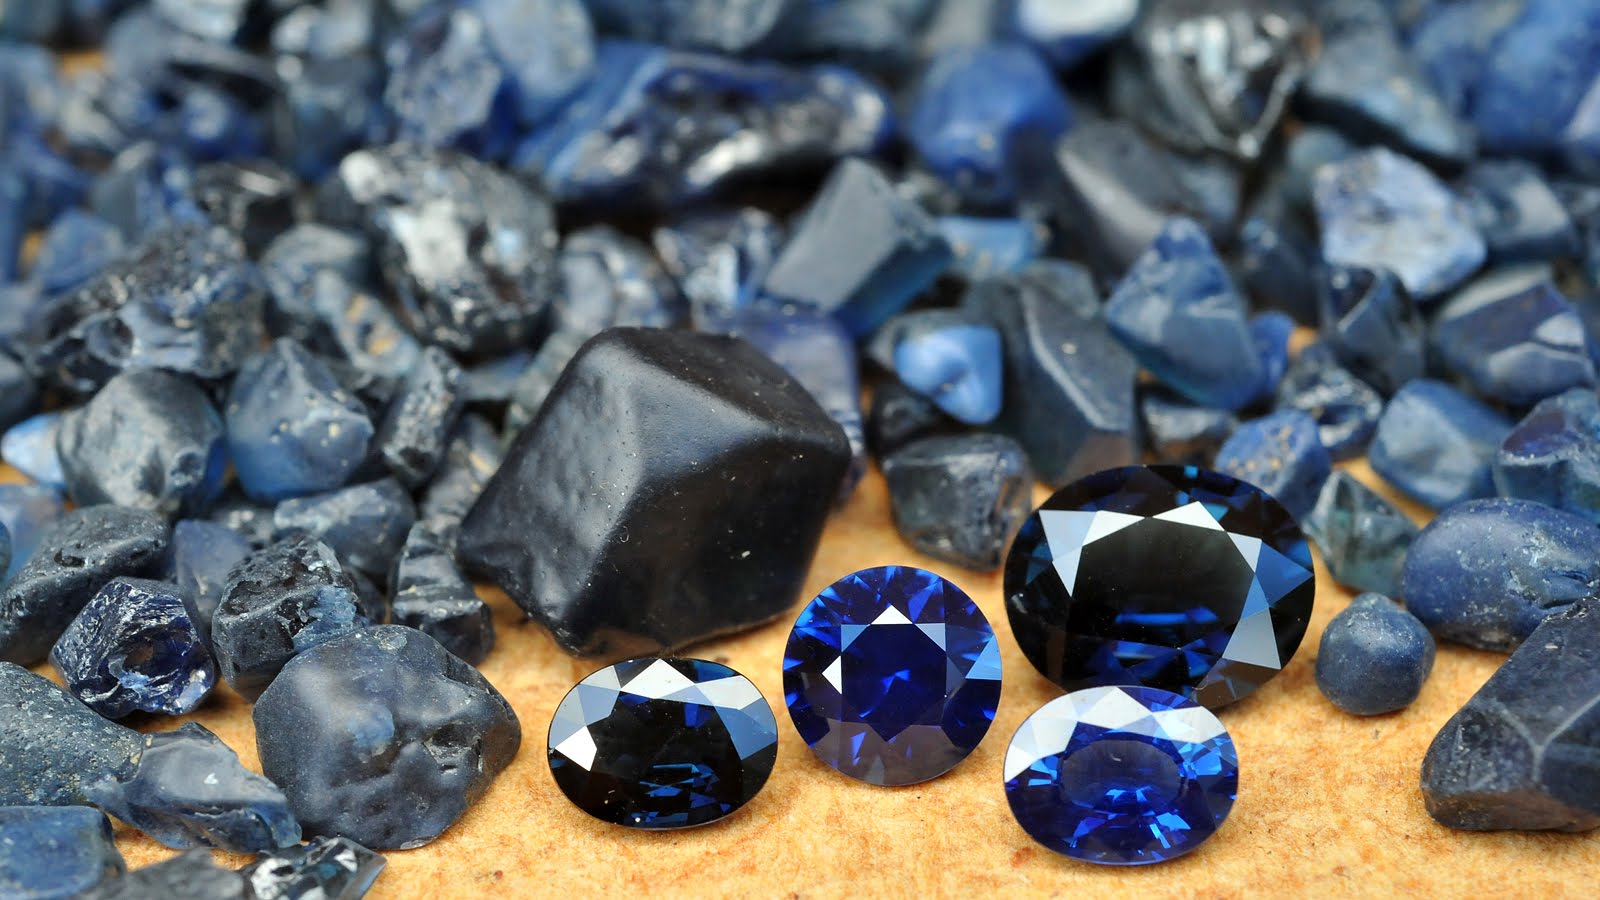 5 Celebrities who wear blue sapphire for their fortune